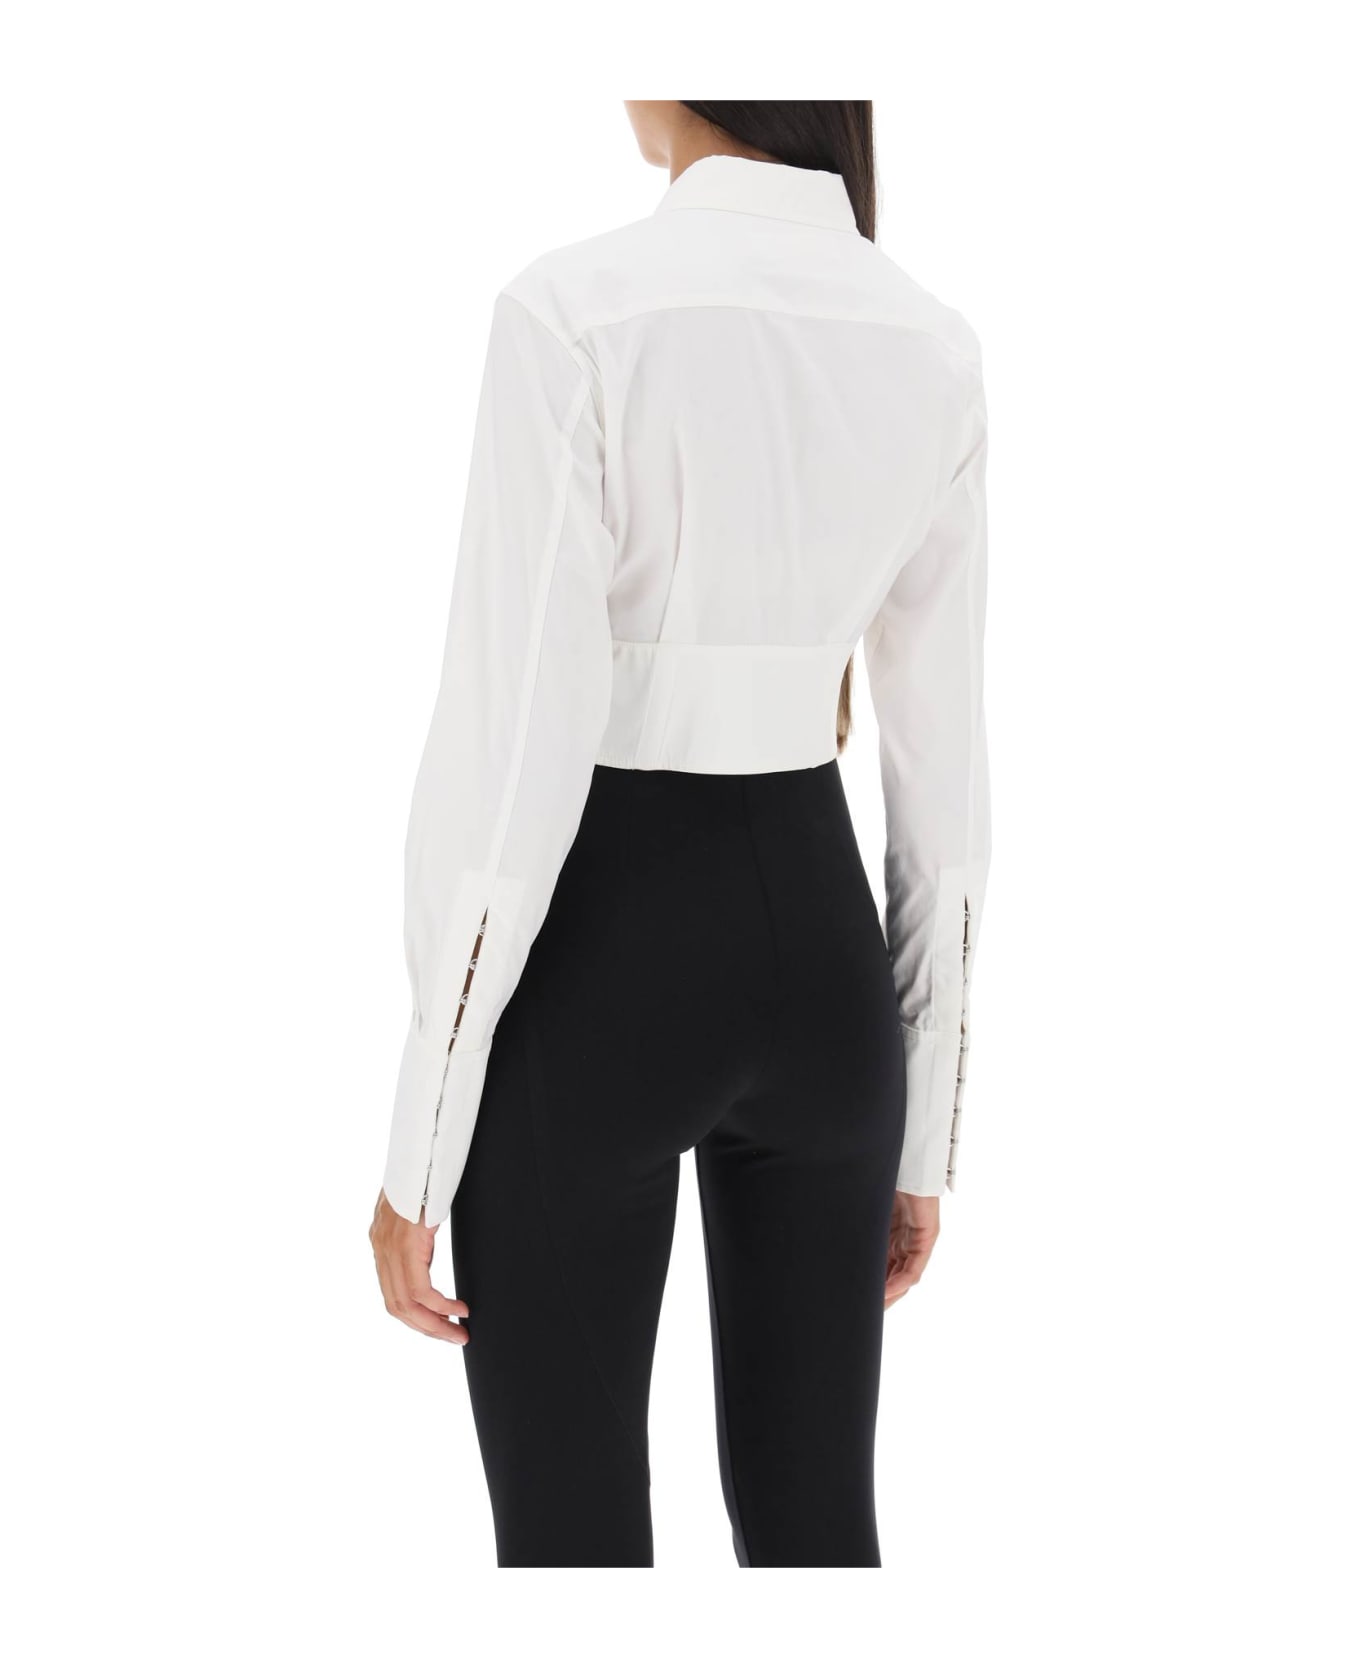 Dion Lee Cropped Shirt With Underbust Corset - IVORY (White)